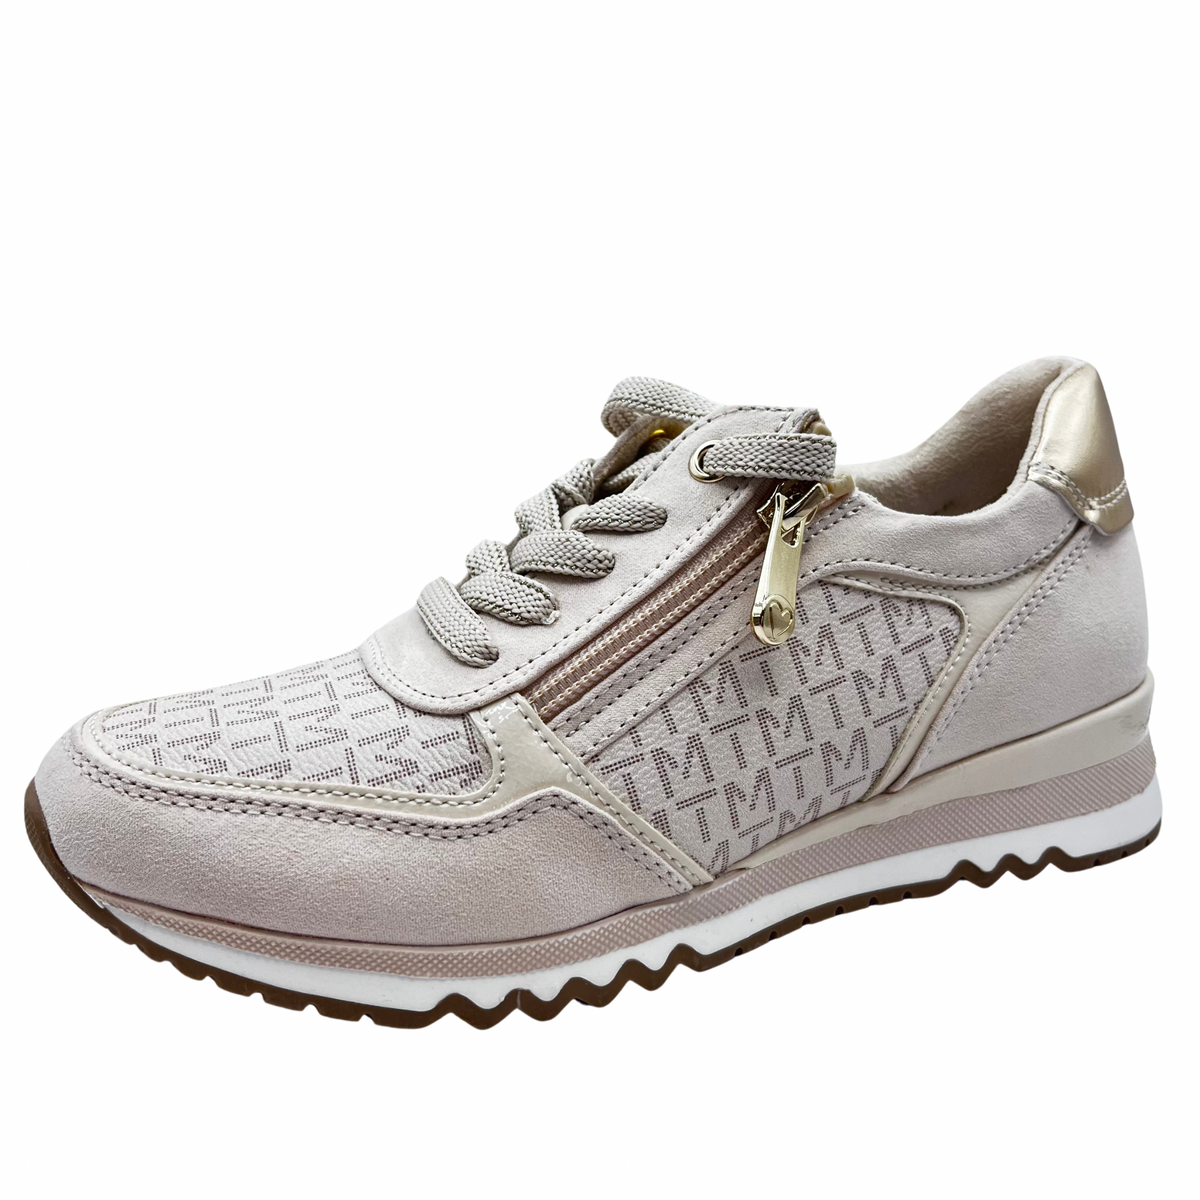 Marco Tozzi Beige Trainer With Side Design